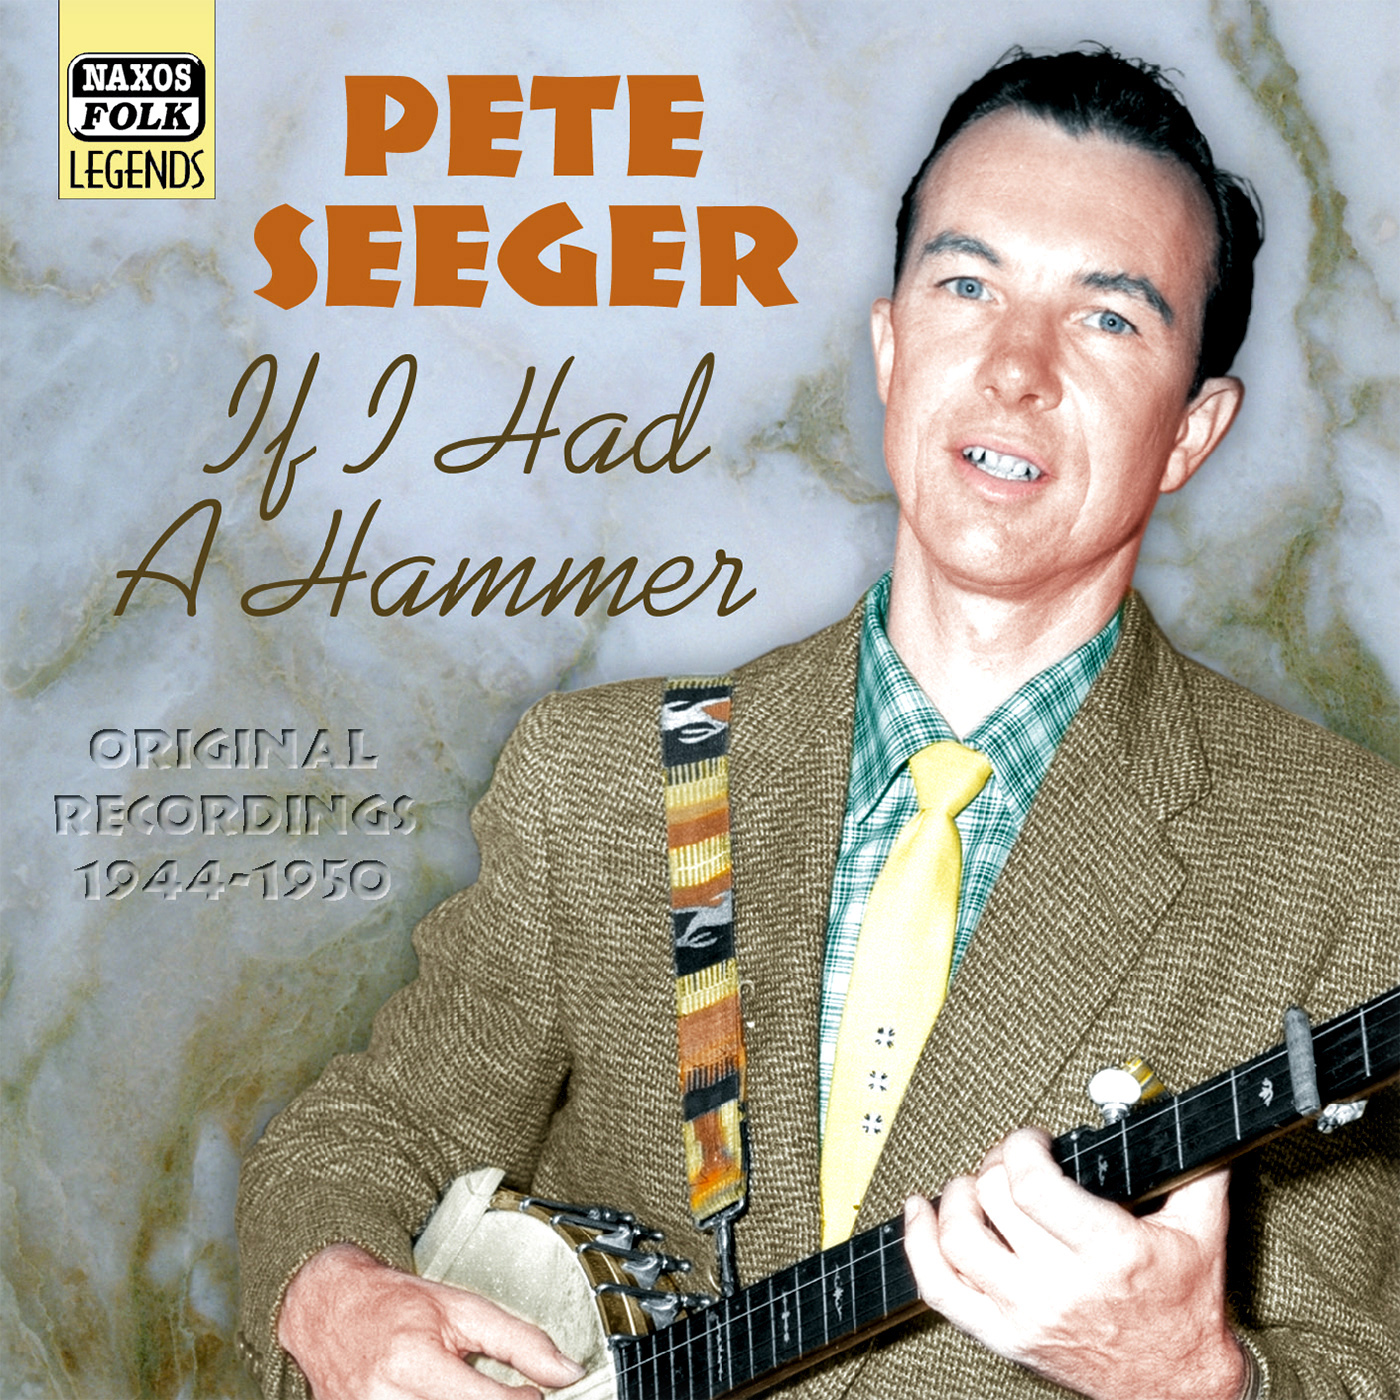 SEEGER, Pete: If I Had a Hammer (1944-1950)